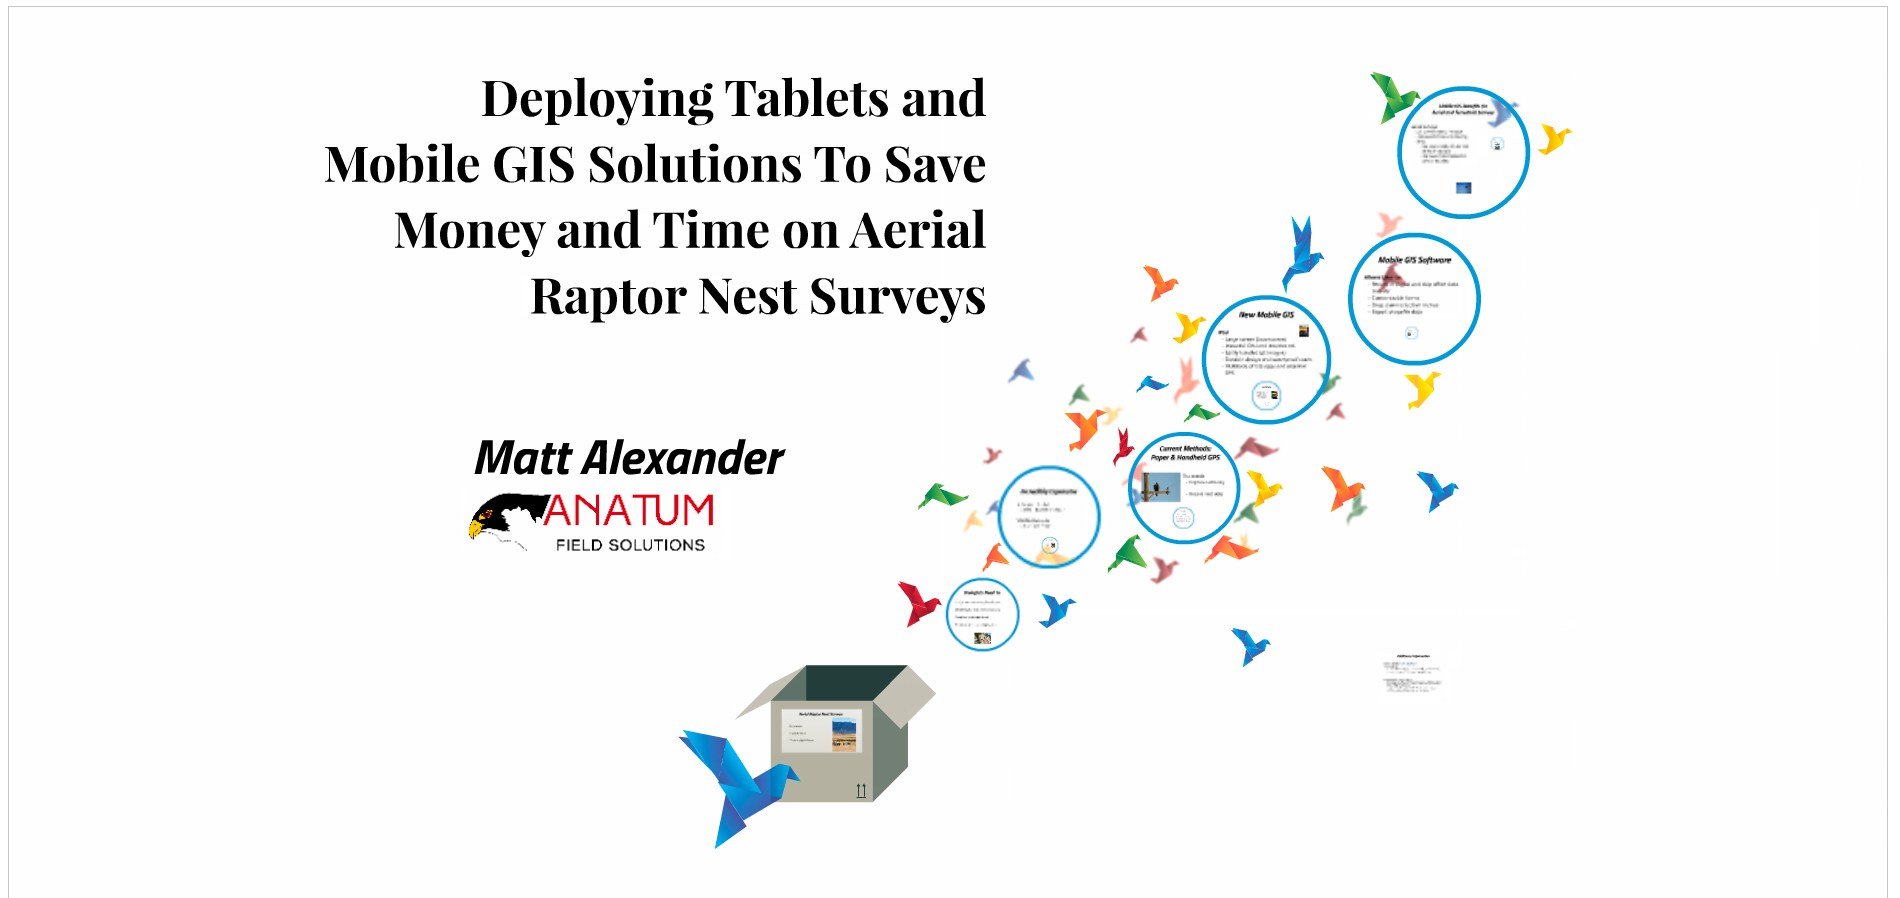 Using Tablets For Data Collection to Increase the Efficiency of Aerial Surveys